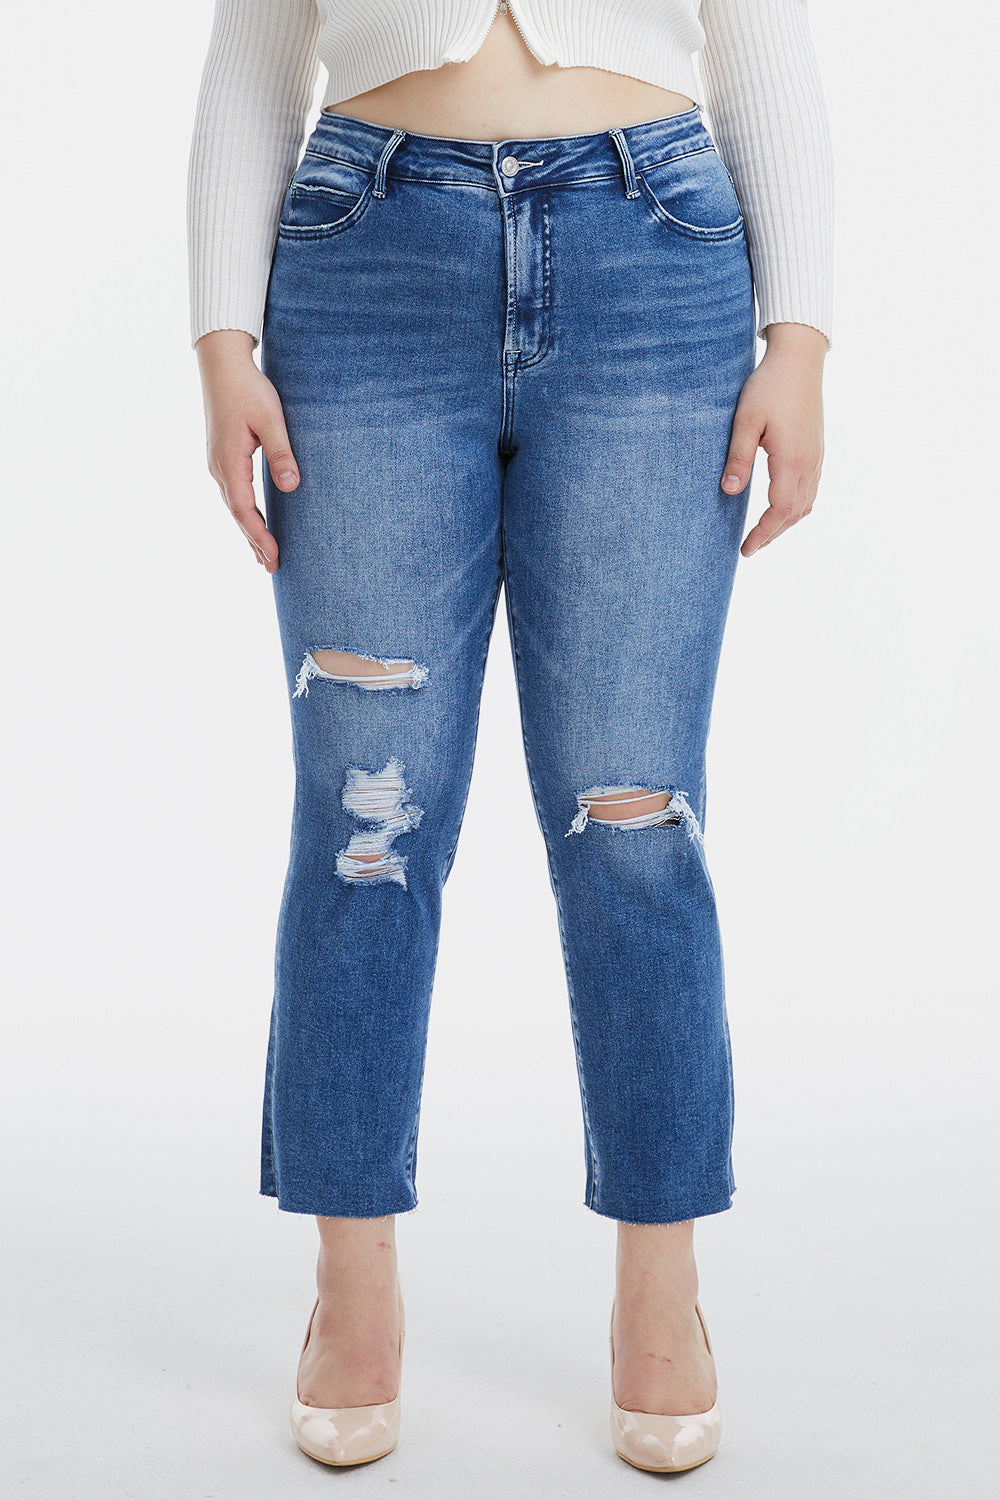 BAYEAS Full Size High Waist Distressed Cat's Whiskers Straight Jeans - TRENDMELO